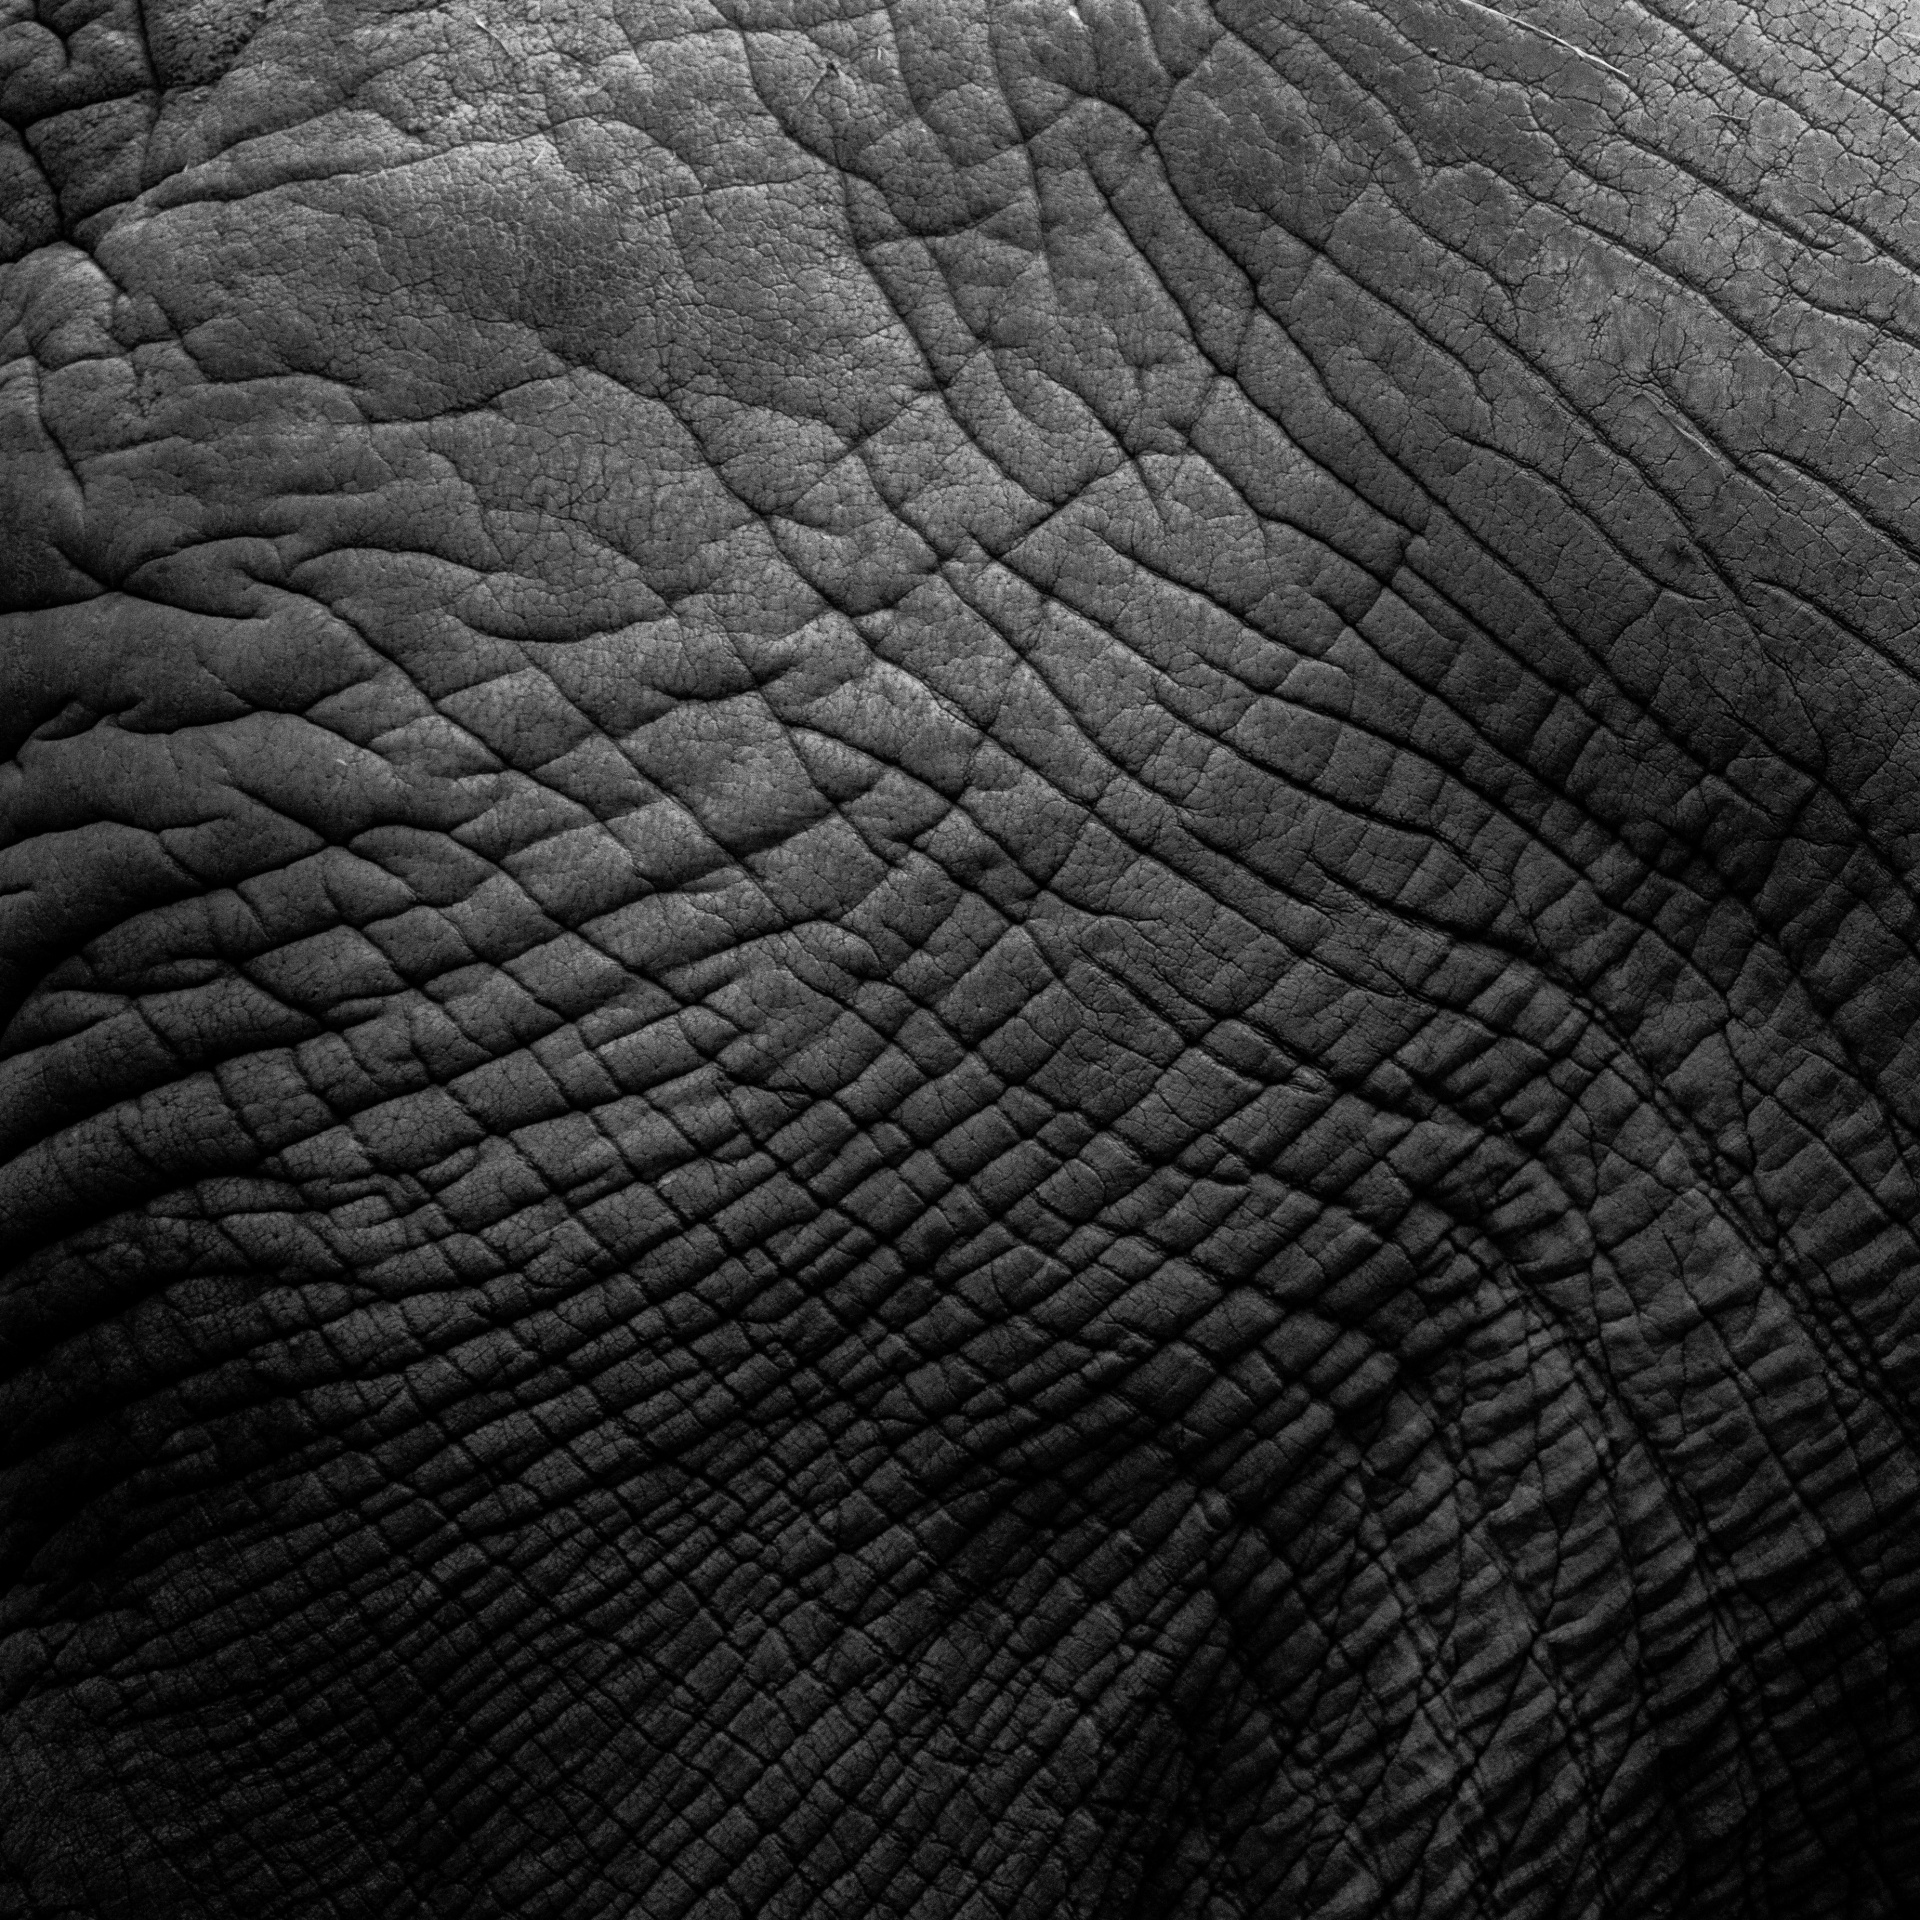 Download free photo of Abstract,animal,background,black,close up - from ...